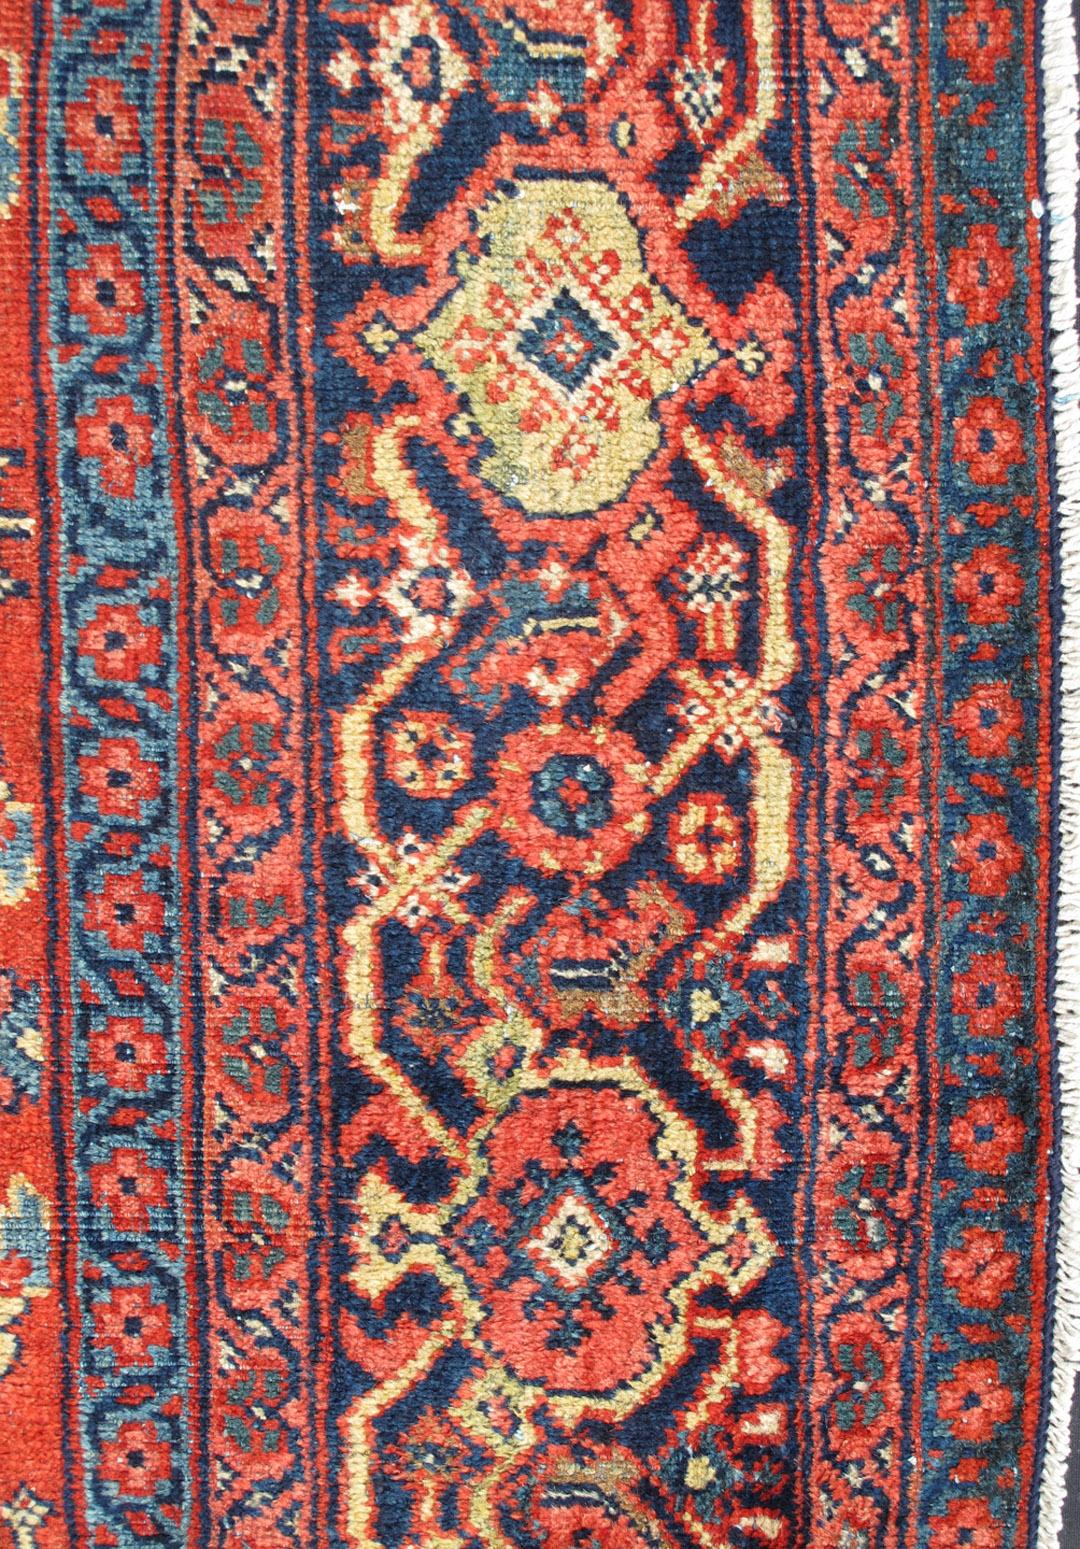 Hand-Knotted Square Size Geometric Antique Persian Mahal-Sultanabad Rug in Red and Blue Colo For Sale